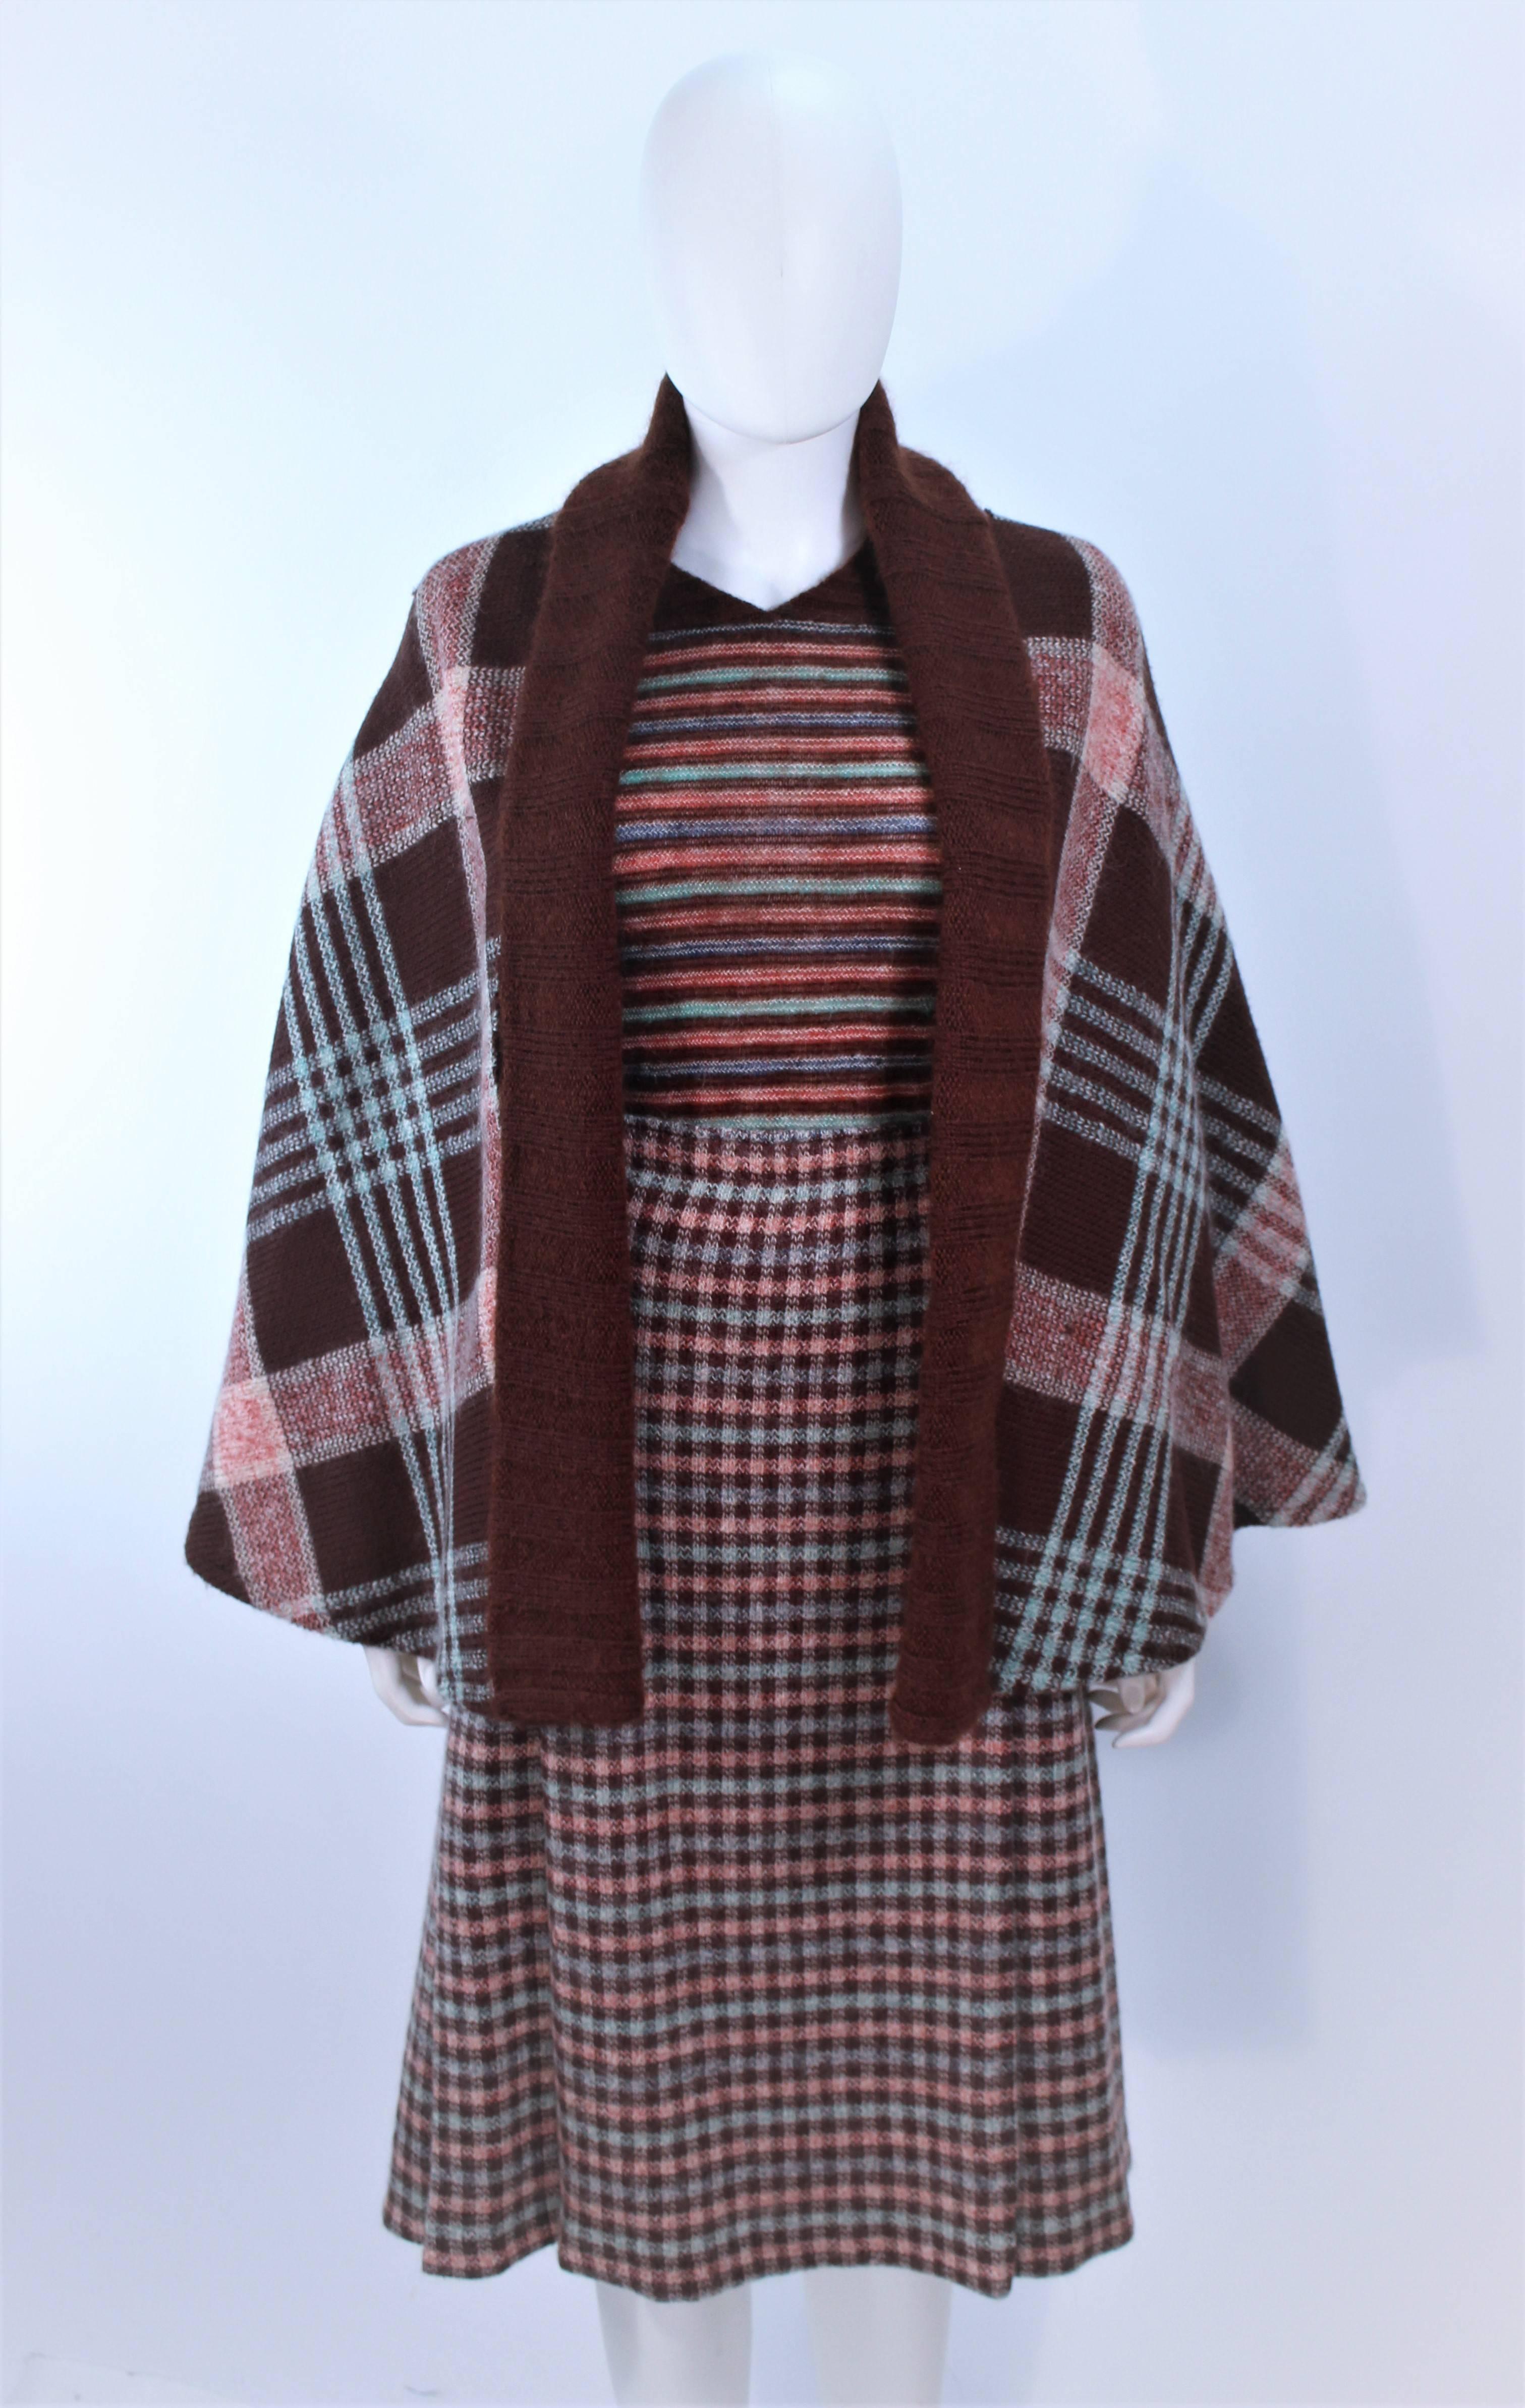 This Missoni design is composed of wool in a brown plaid and stripe. Features a reversible cape, sweater, and plaid skirt with pleats. The skirt has side pockets. In excellent vintage condition.

**Please cross-reference measurements for personal